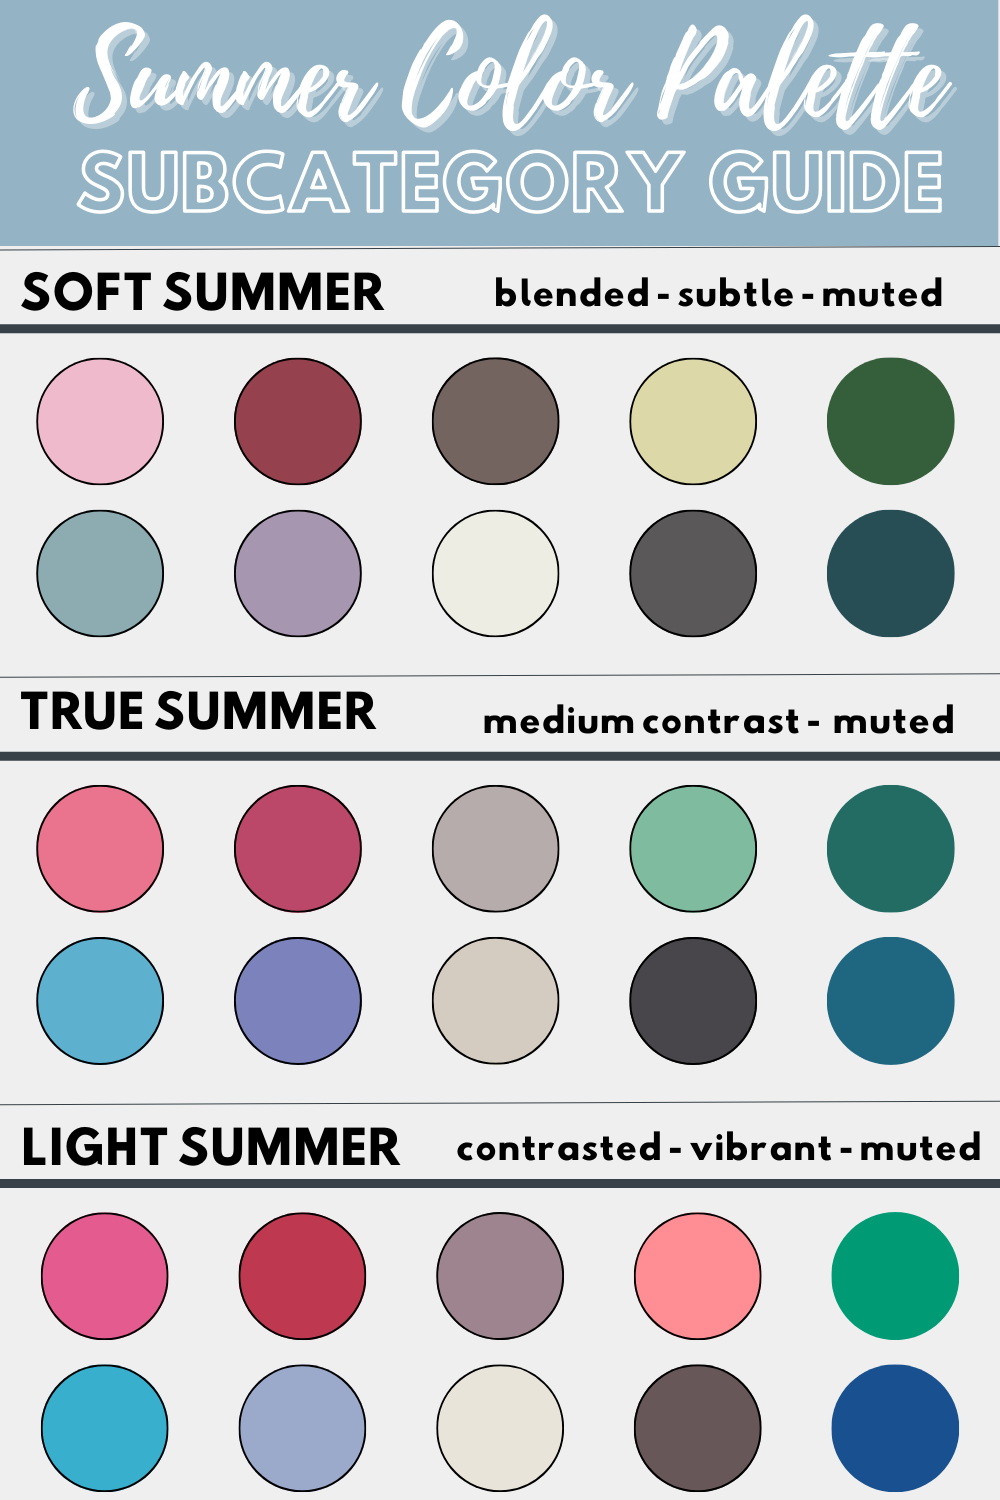 a chart that says, "Summer Color Palette subcategory guide" with soft summer, true summer, and light summer hues shown to determine the best colors to wear